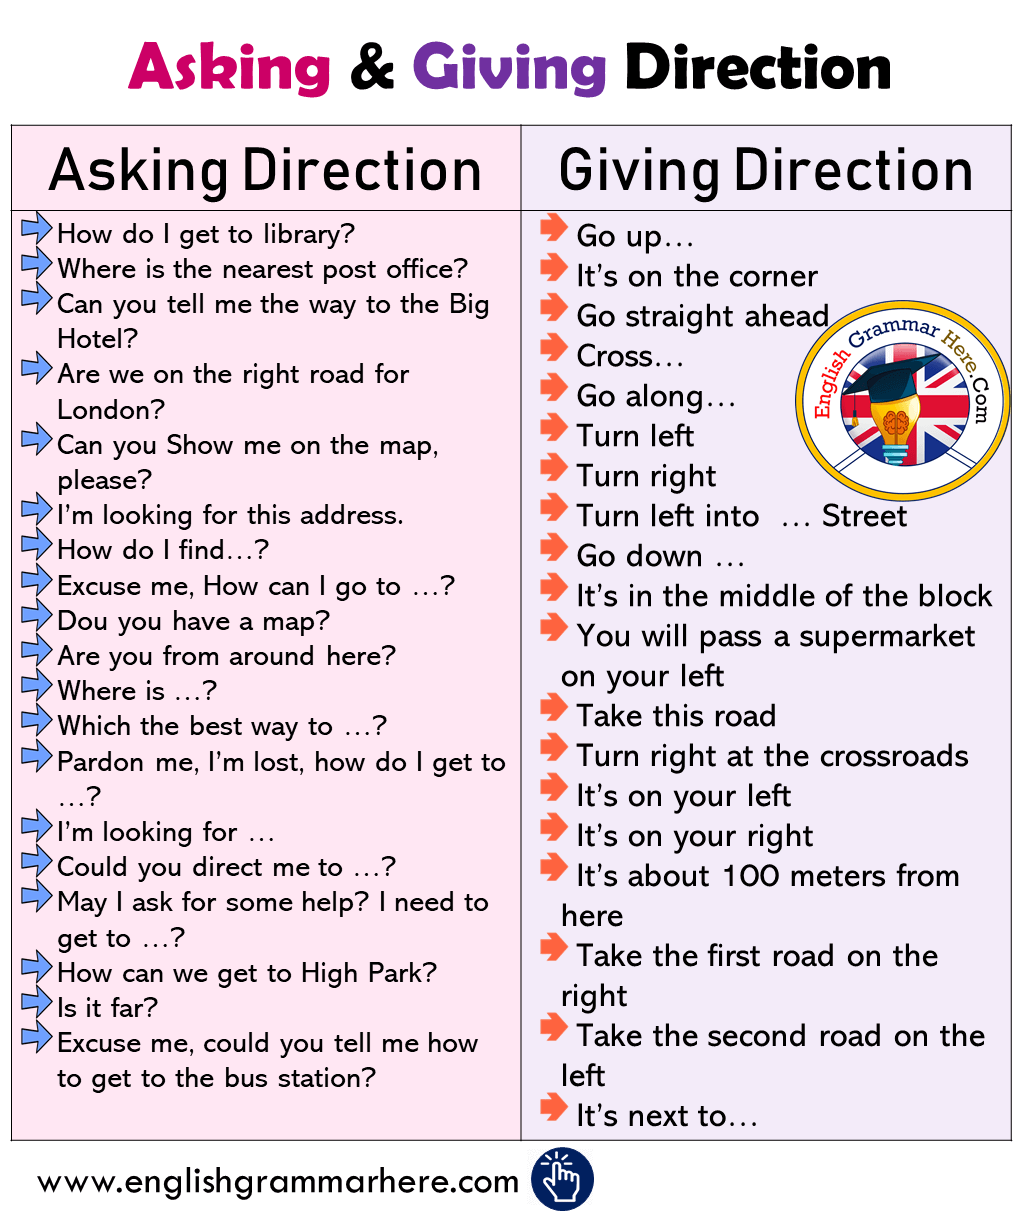 Asking and Giving Direction Phrases